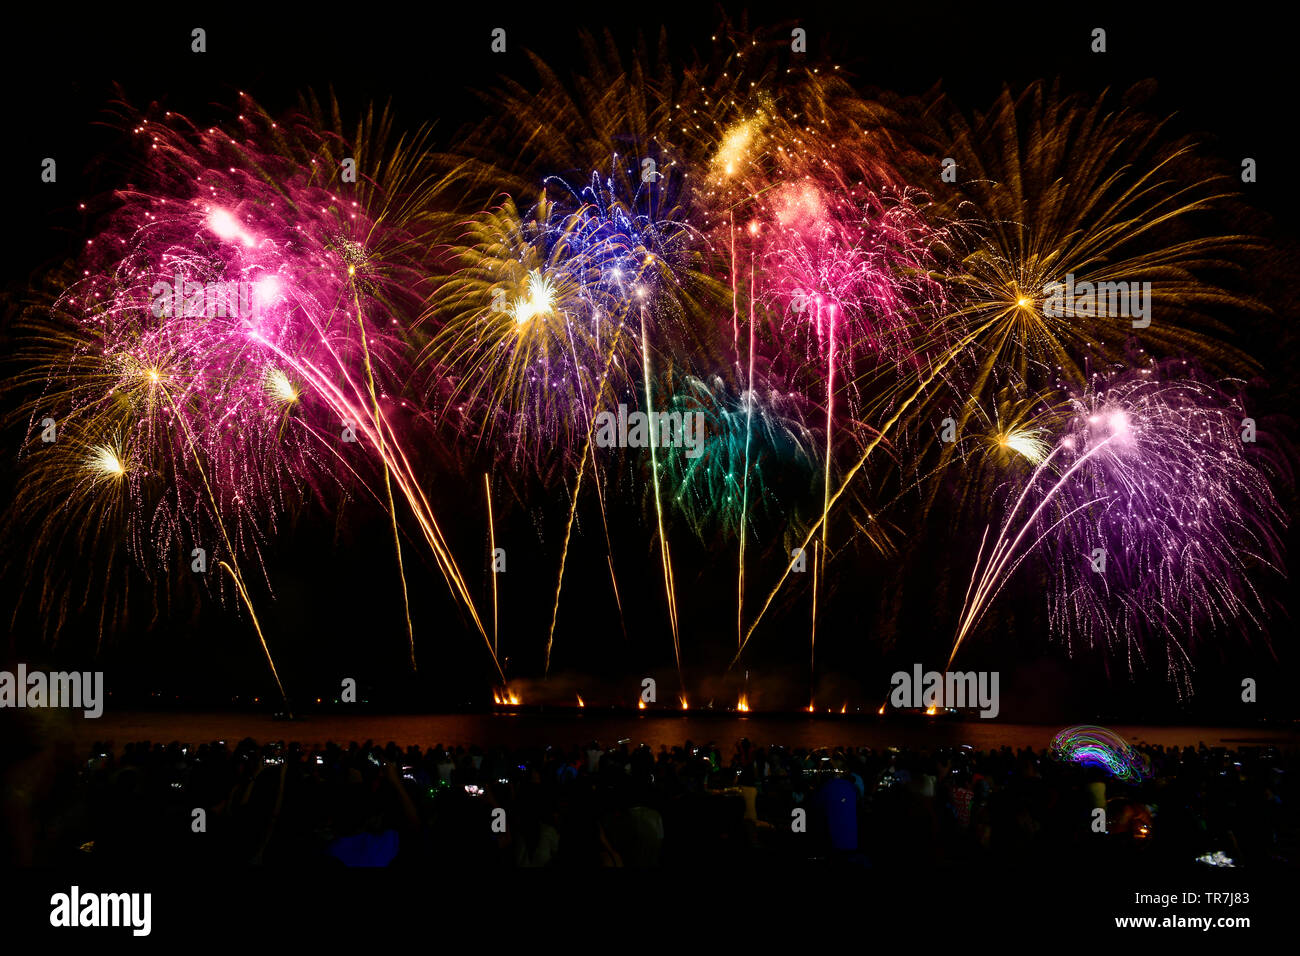 Colorful fireworks celebration and the night sky background with crowded people on the beach. Stock Photo